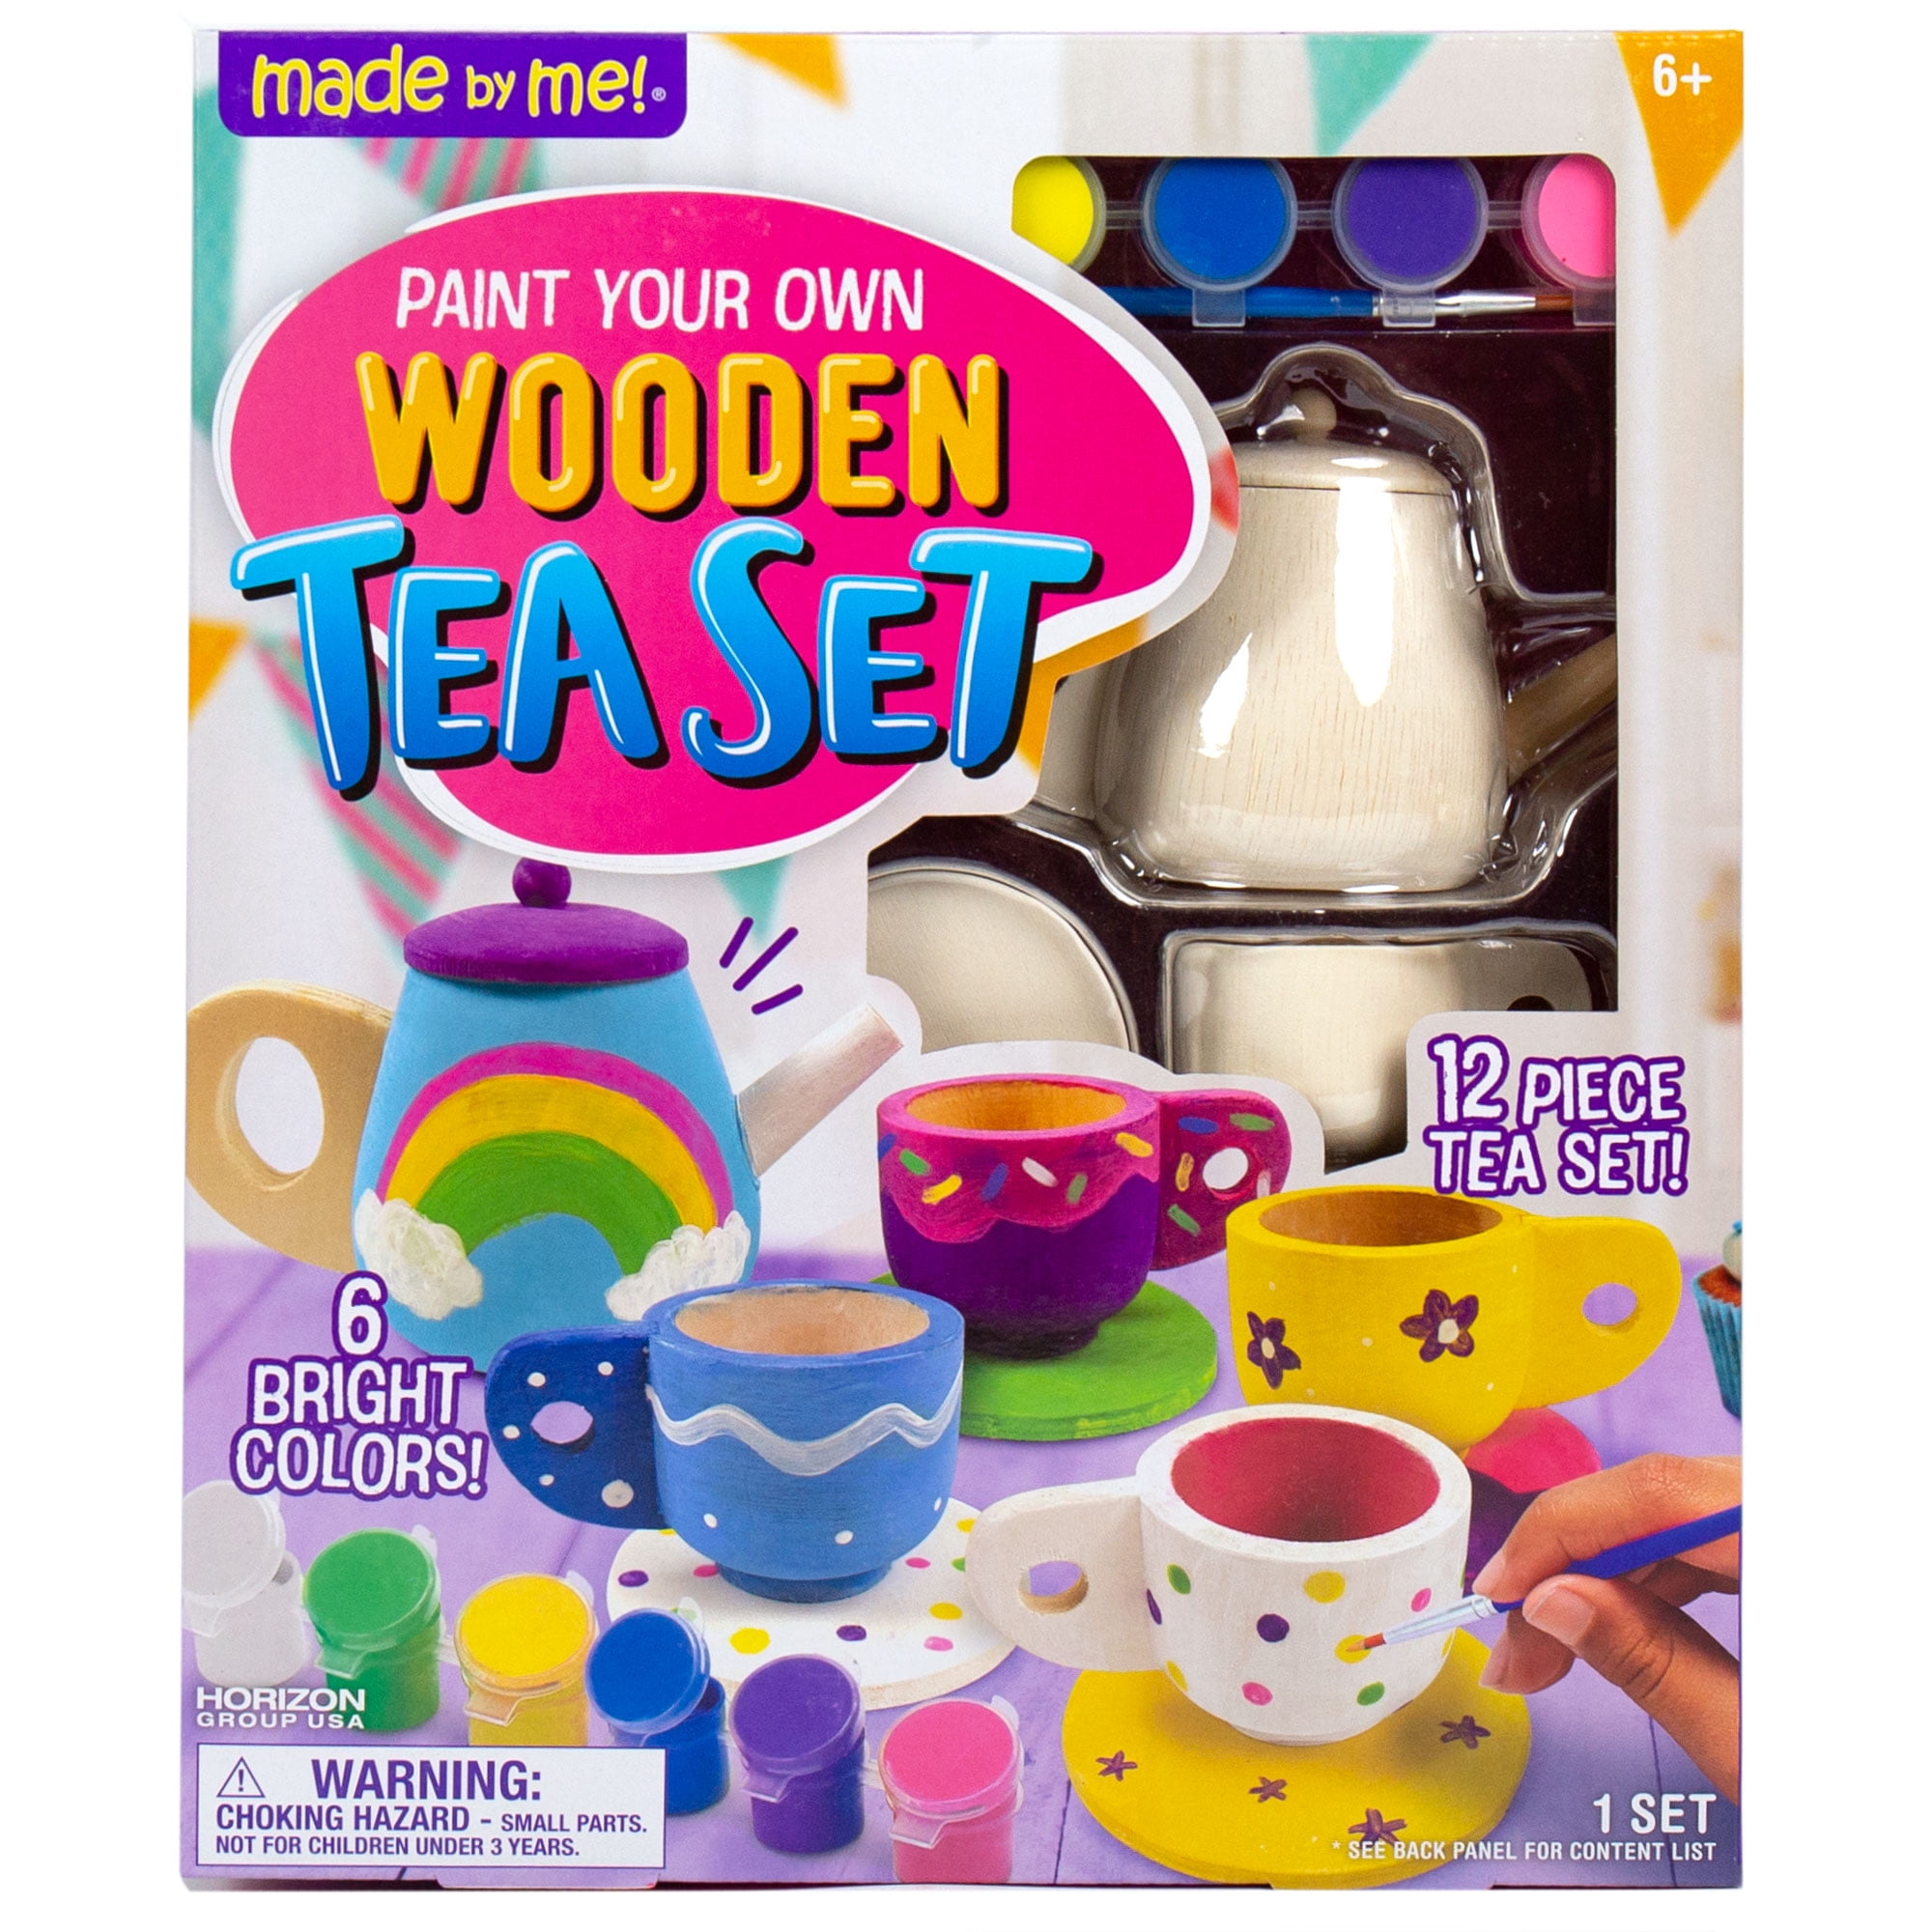 Number 1 in Gadgets Decorate Your Own Figurines Paint Your Own Kids Set - Includes Six Figurines Paint Brush Six Pots of Paint